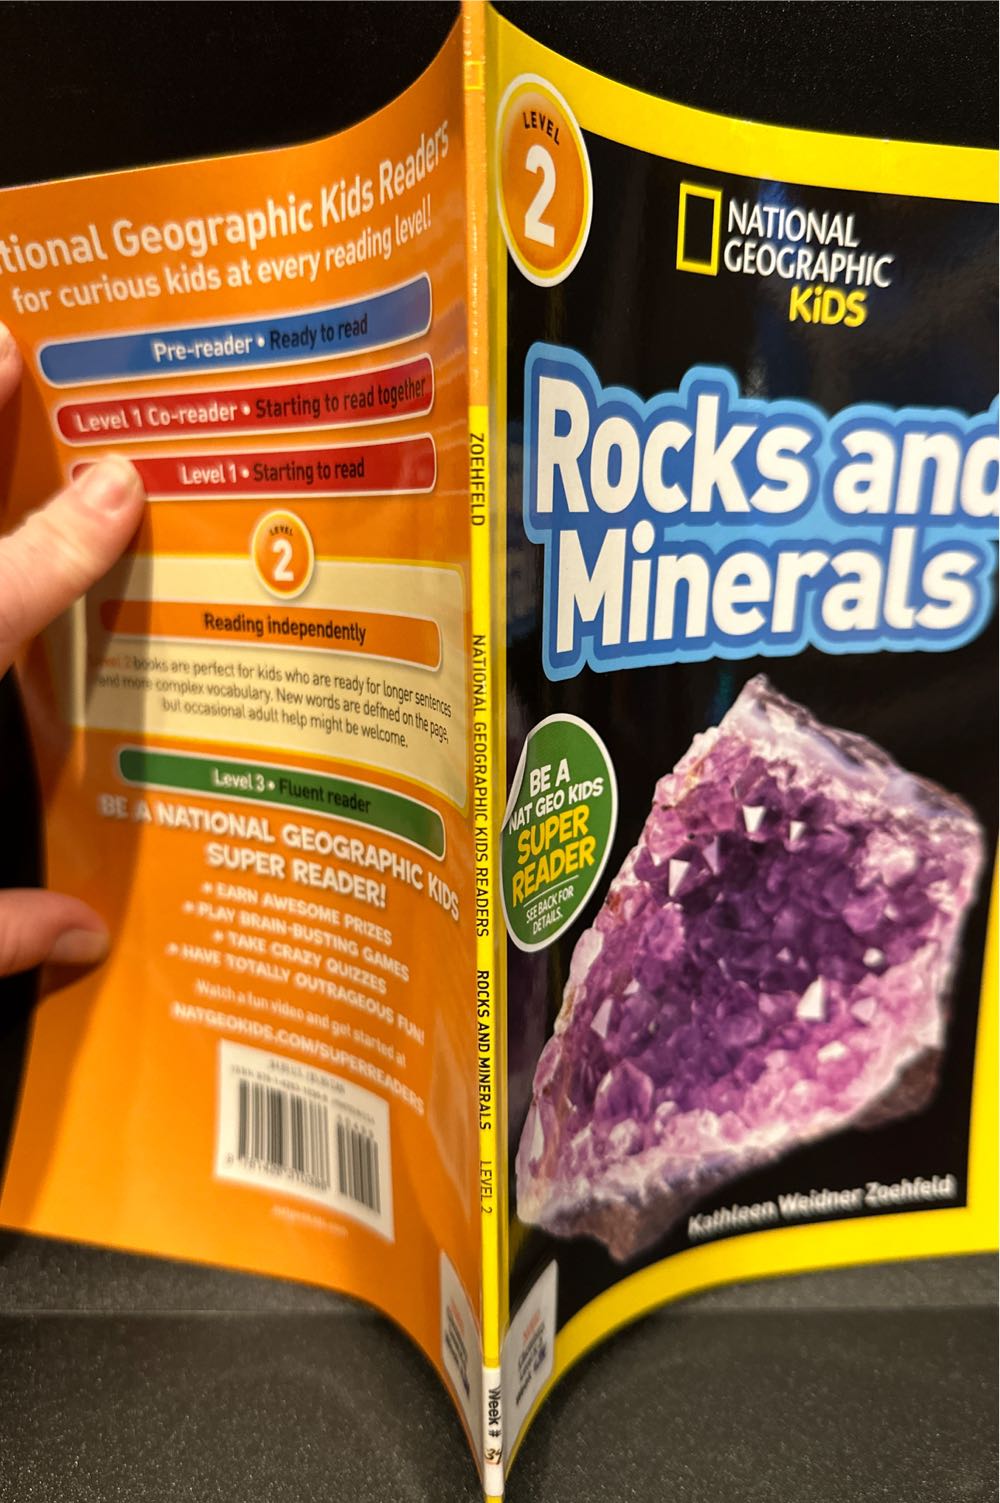 National Geographic Kids- Rocks and Minerals - Kathleen Weidner Zoehfeld (National Geographic Books - Paperback) book collectible [Barcode 9781426310386] - Main Image 2